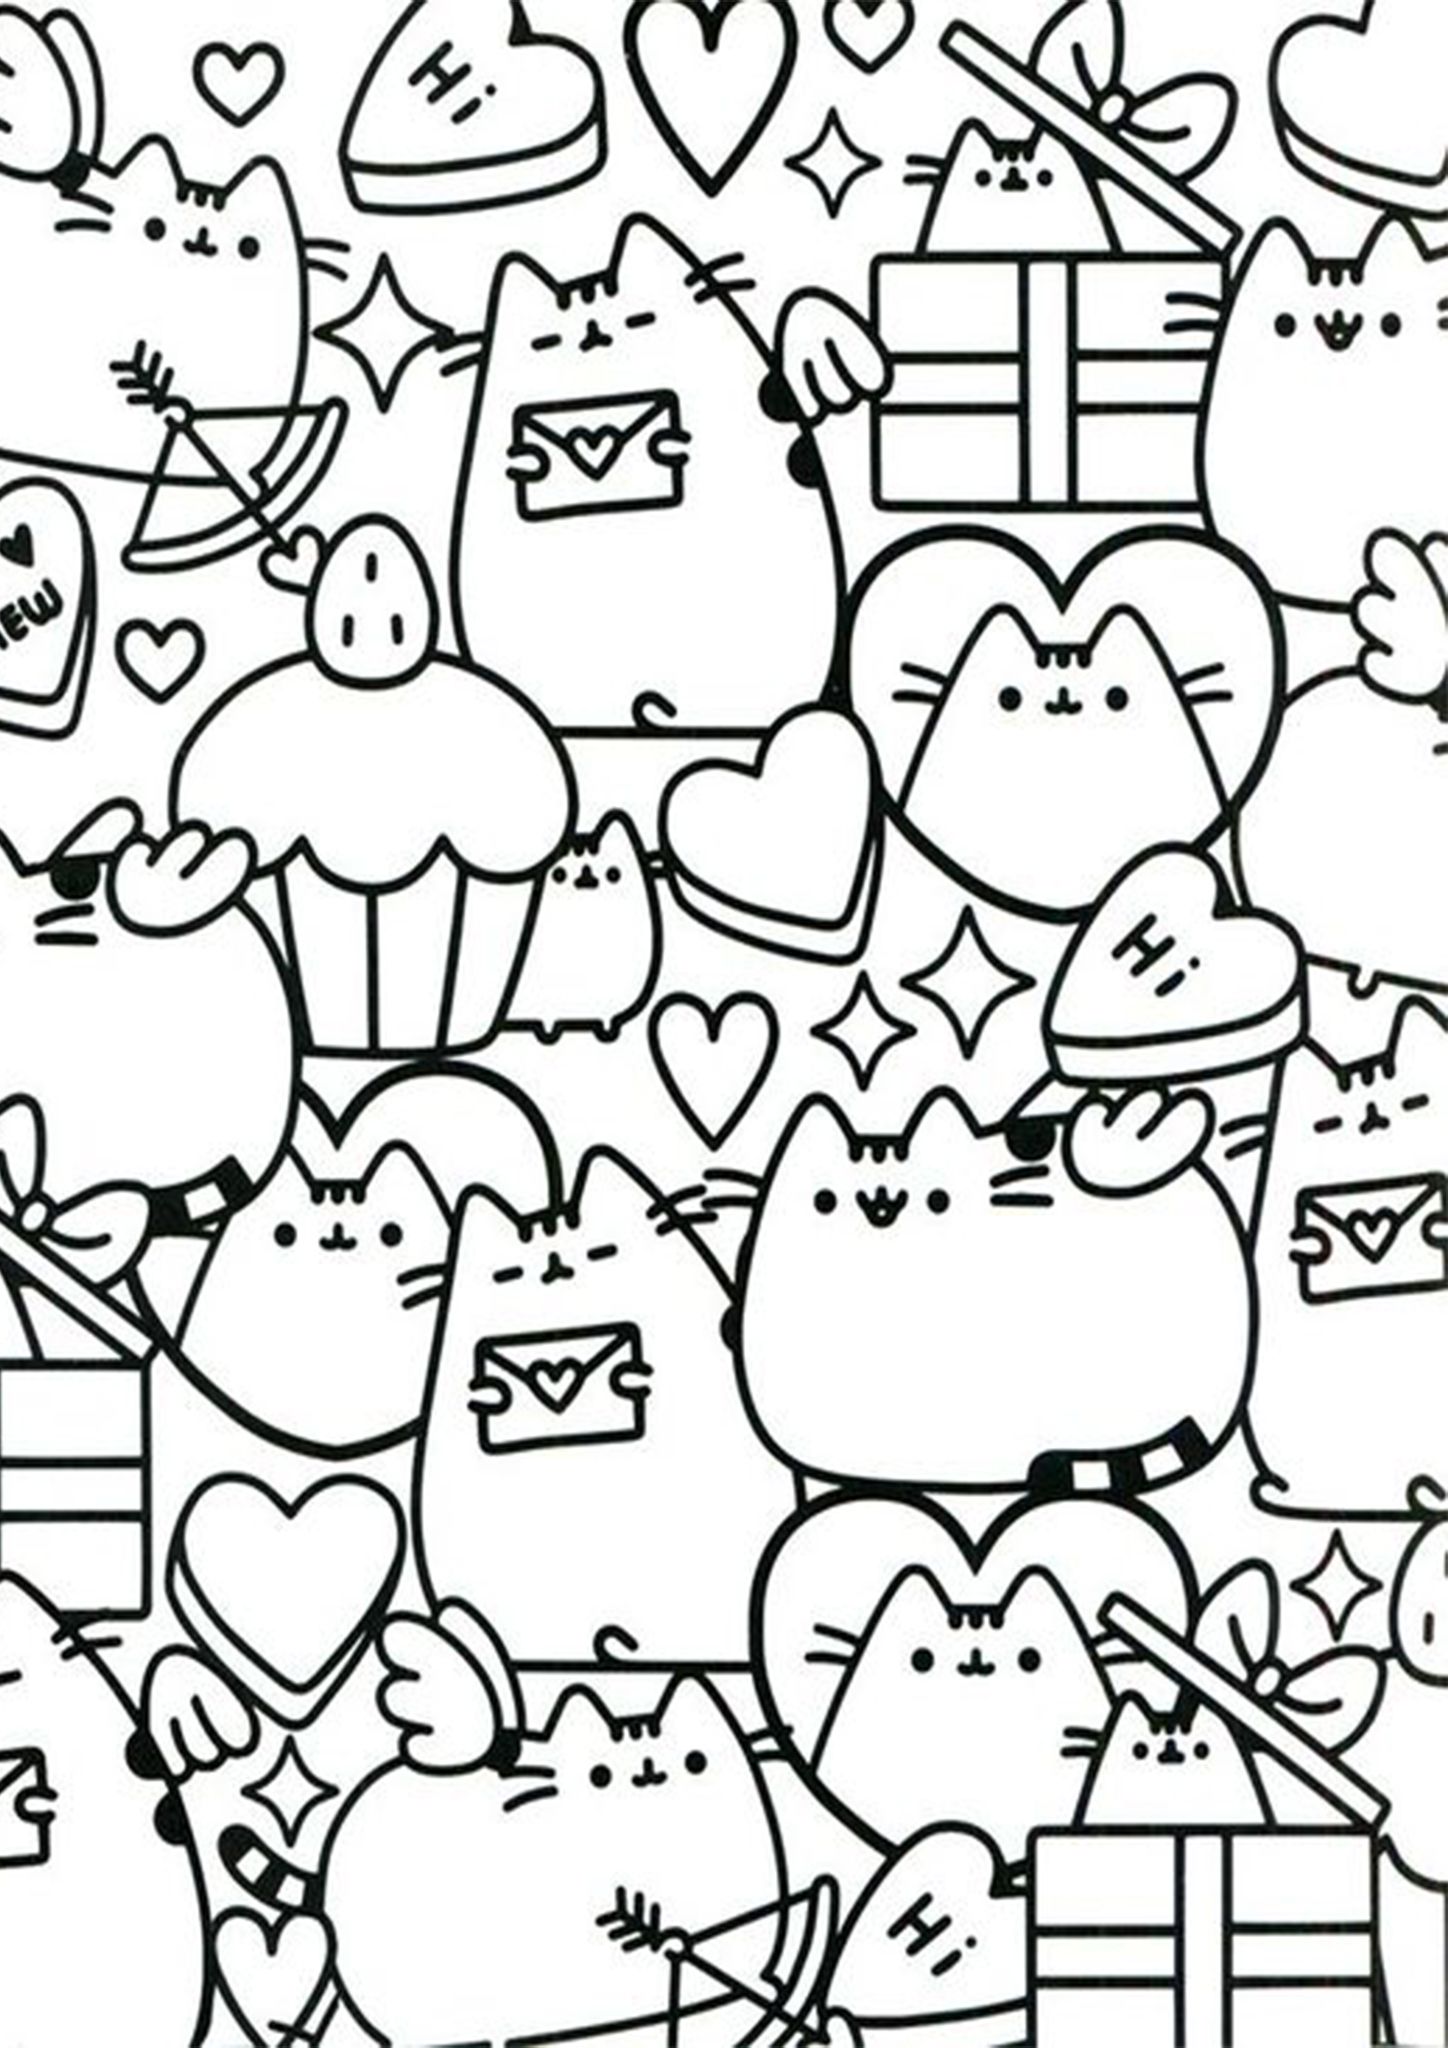 Free & Easy To Print Pusheen Coloring Pages | Pusheen coloring pages,  Valentine coloring pages, Cat coloring page